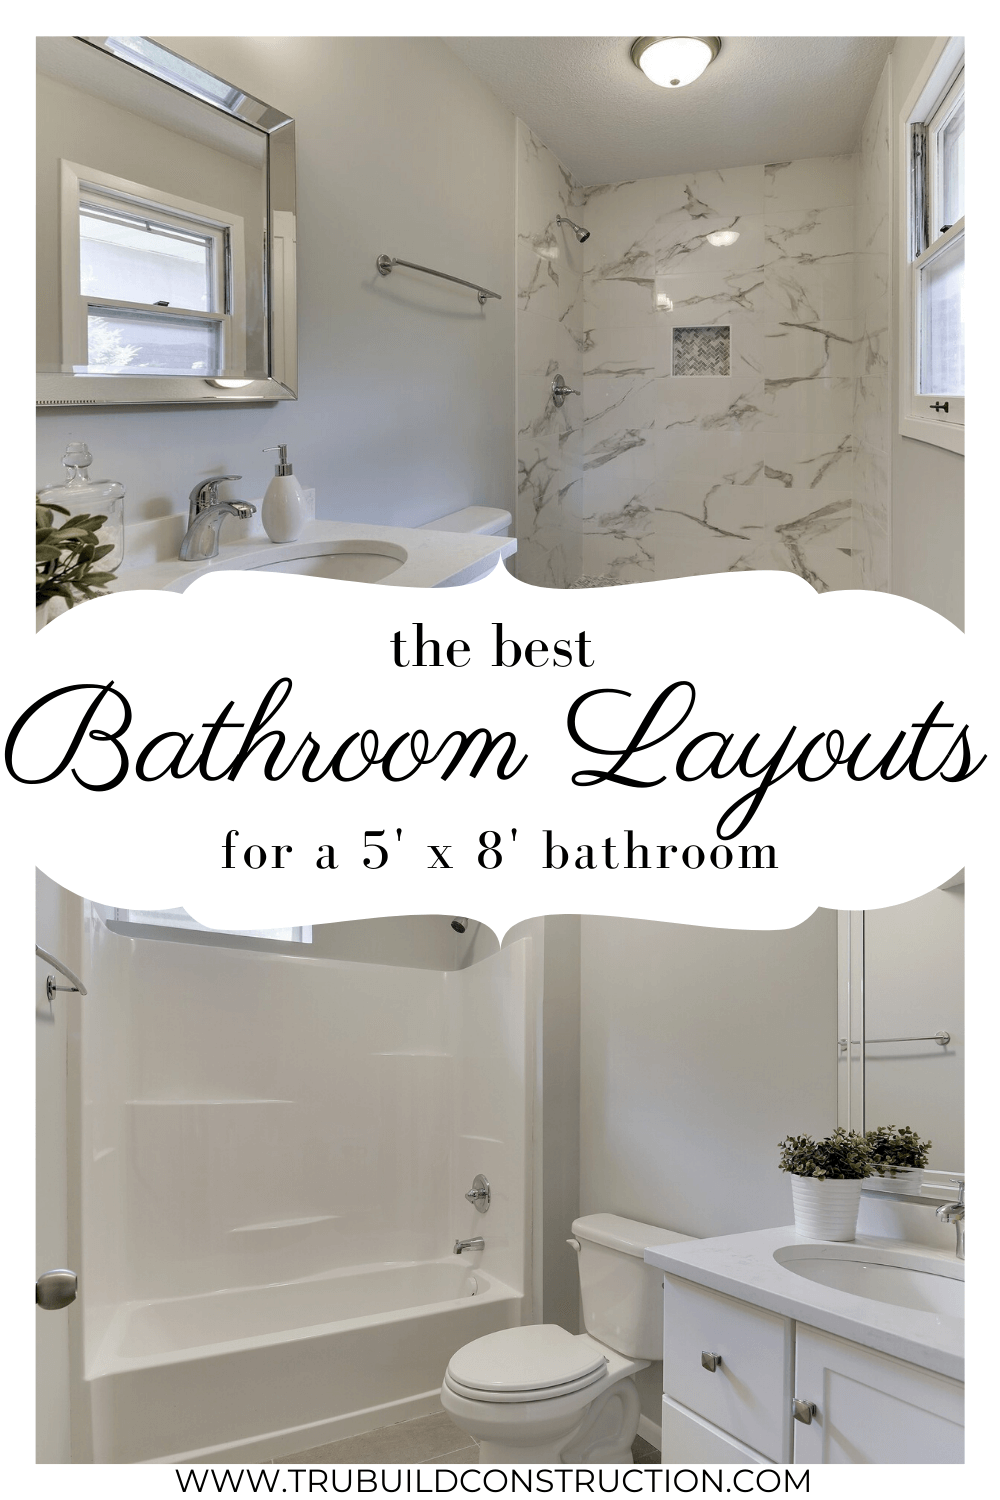 The Best 5 X 8 Bathroom Layouts And Designs To Make The Most Of Your Space Trubuild Construction